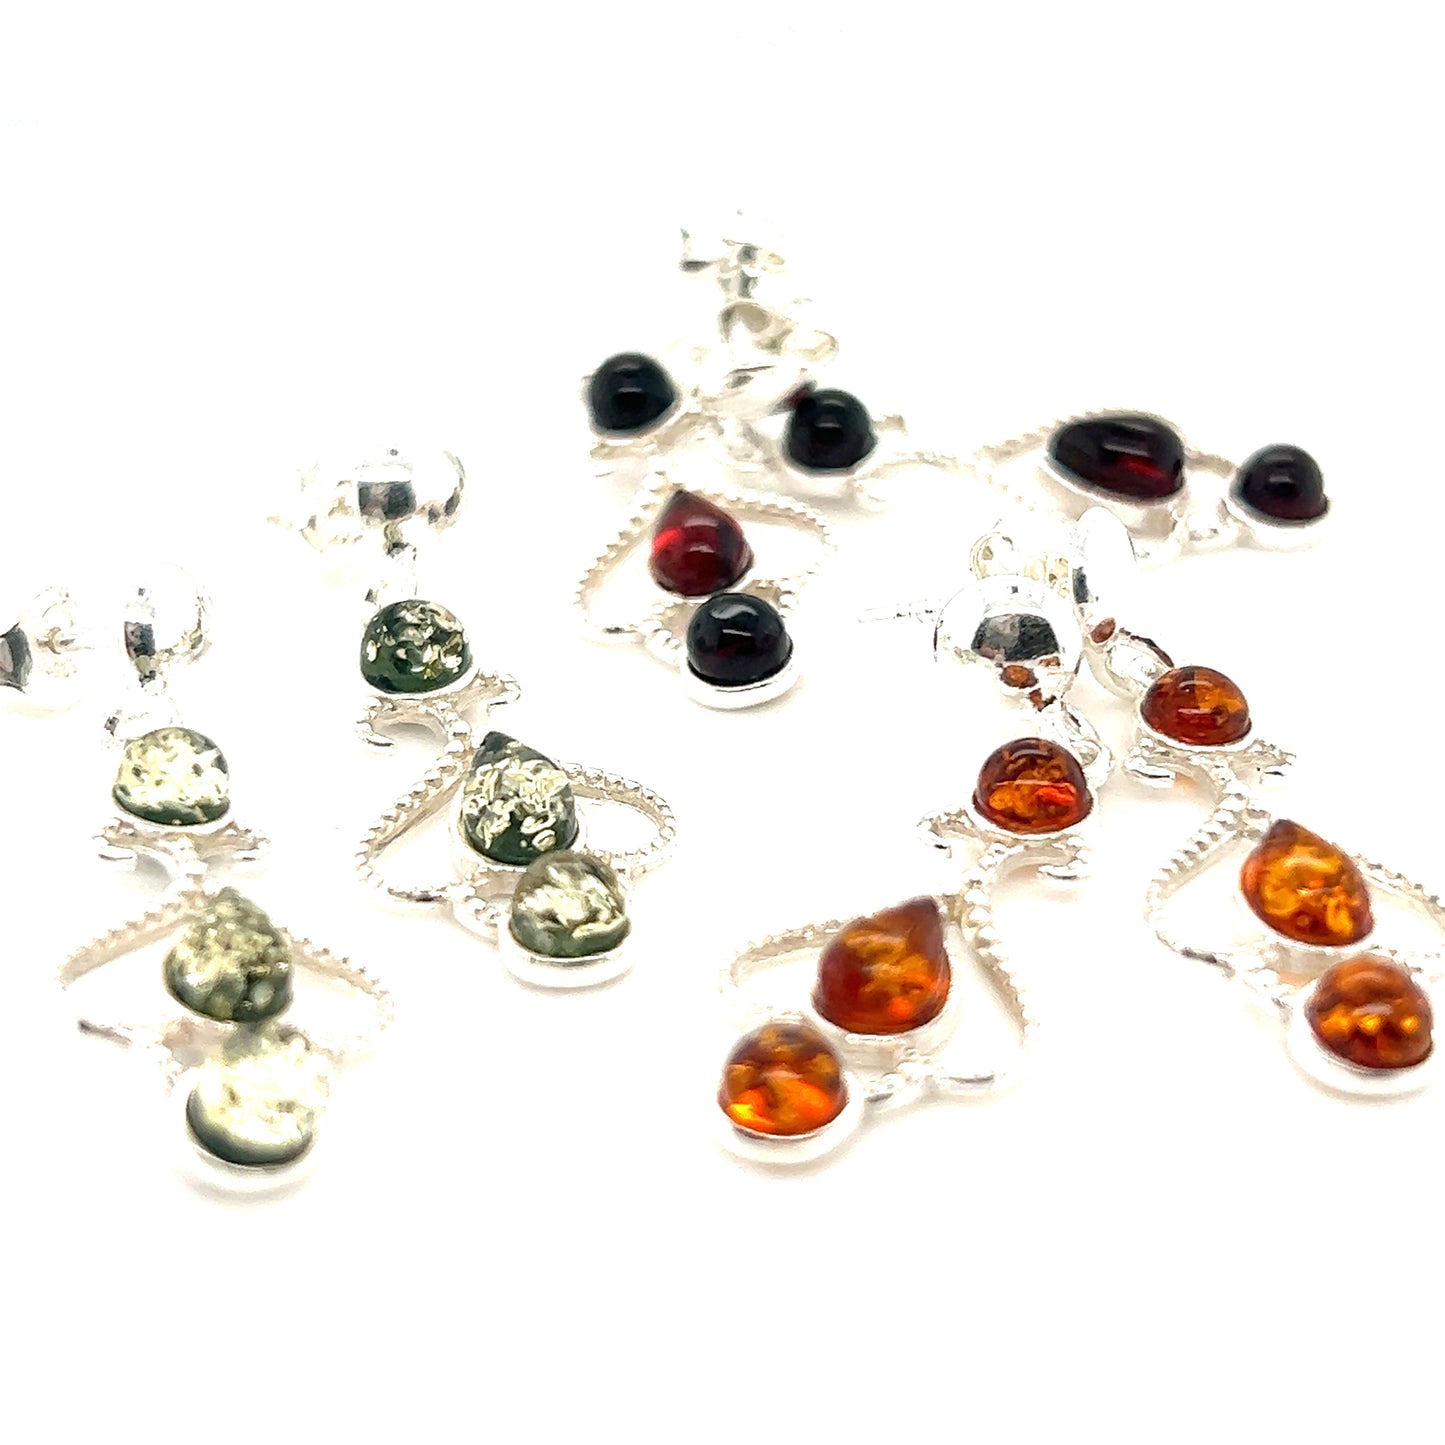 These Exquisite Baltic Amber Scroll Earrings from Super Silver will dangle elegantly from your ears.